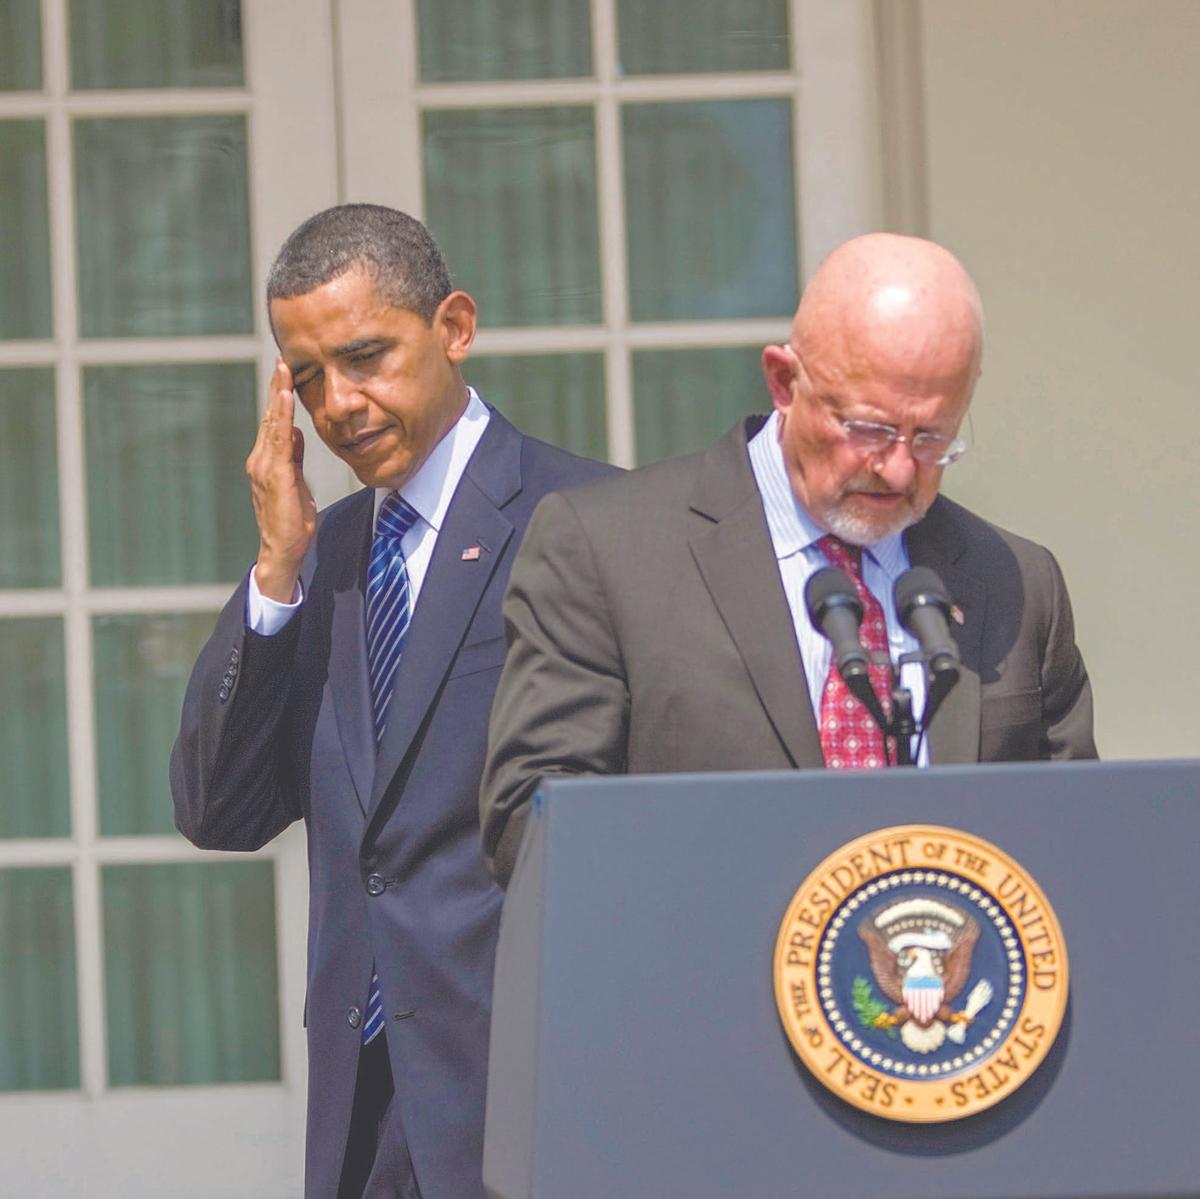 President Barack Obama and Director of Intelligence nominee James Clapper in the Rose Garden of the White House June 5, 2010. (BRENDAN SMIALOWSKI/GETTY IMAGES)